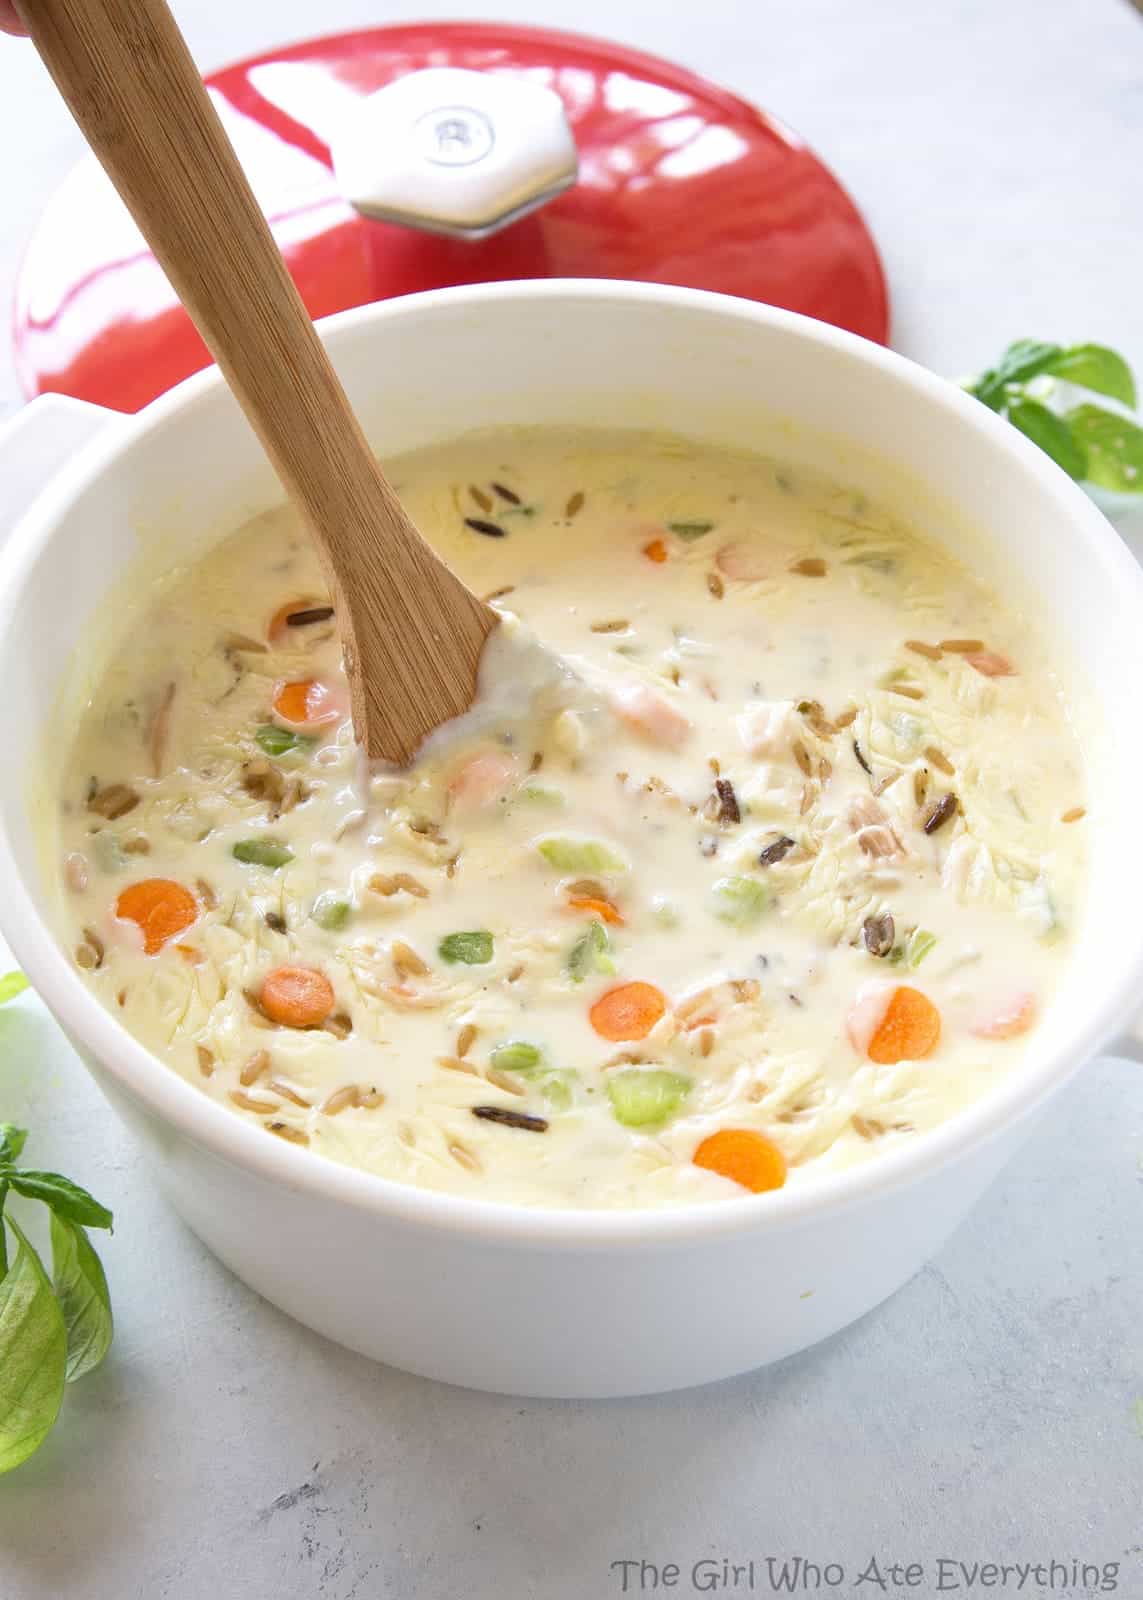 https://www.the-girl-who-ate-everything.com/wp-content/uploads/2016/12/creamy-chicken-wild-rice-soup-32.jpg